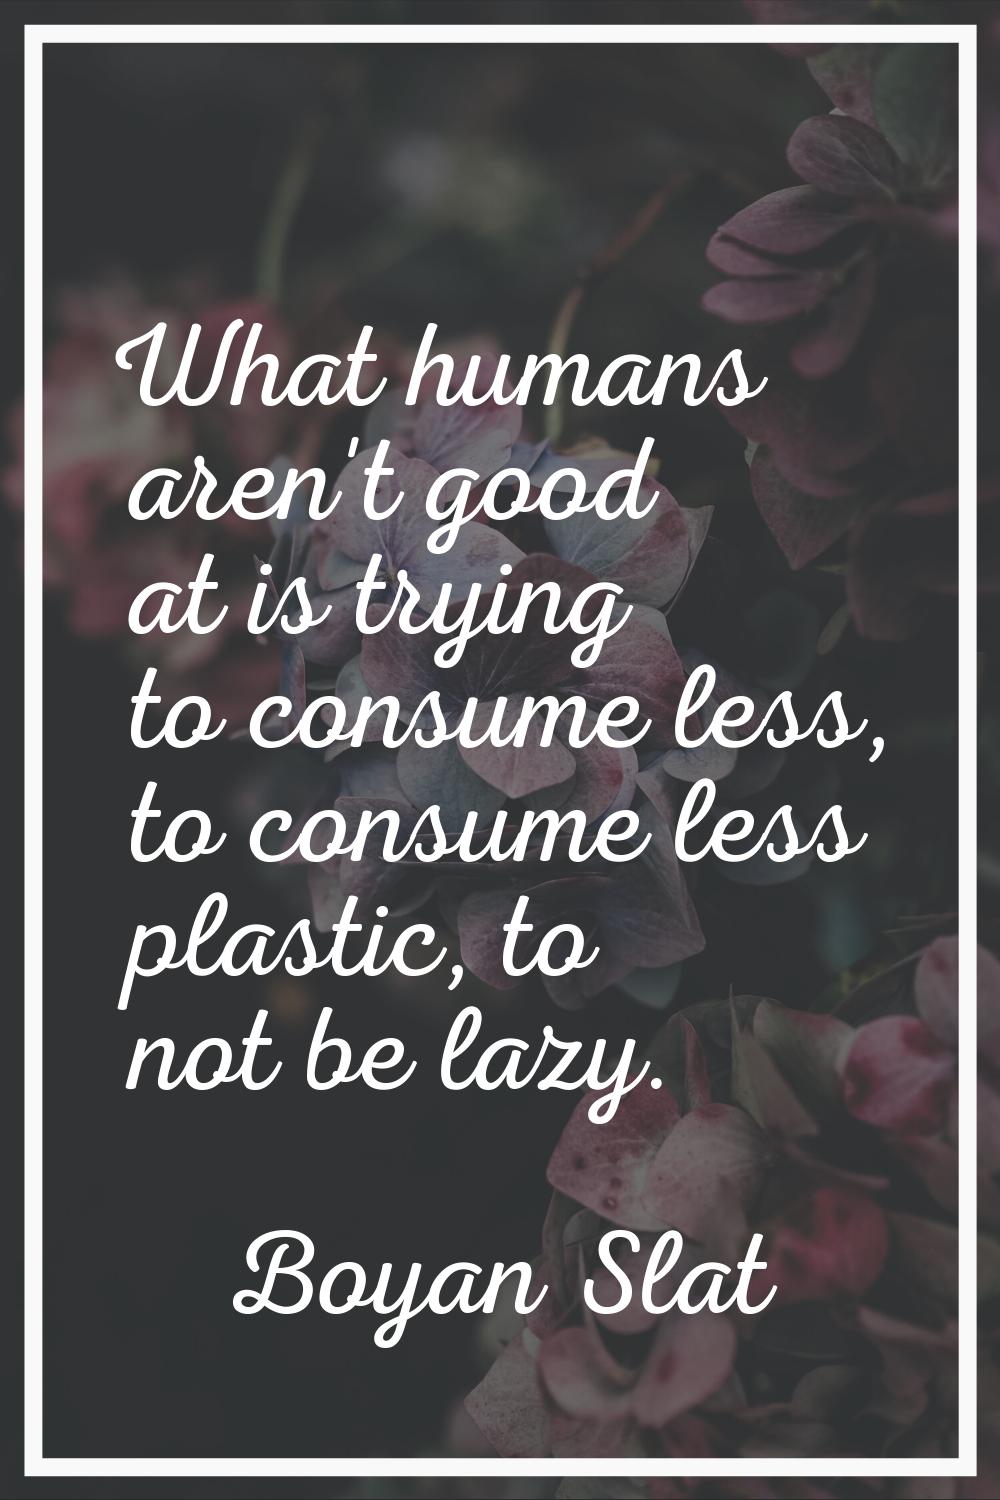 What humans aren't good at is trying to consume less, to consume less plastic, to not be lazy.